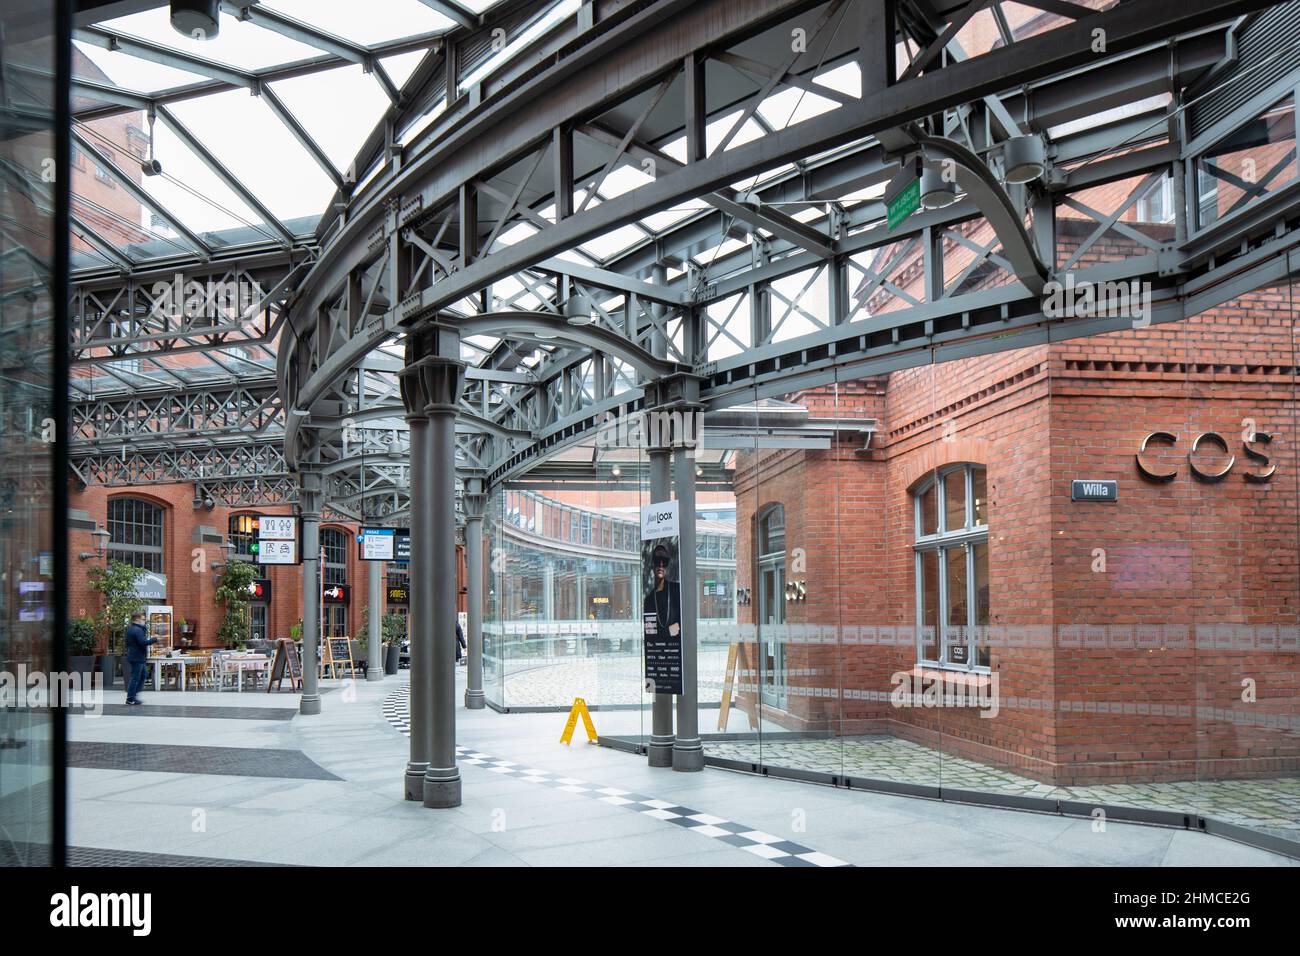 Poznan, Poland - Interiors of a shopping center Old Brewery (Stary Browar). Stock Photo